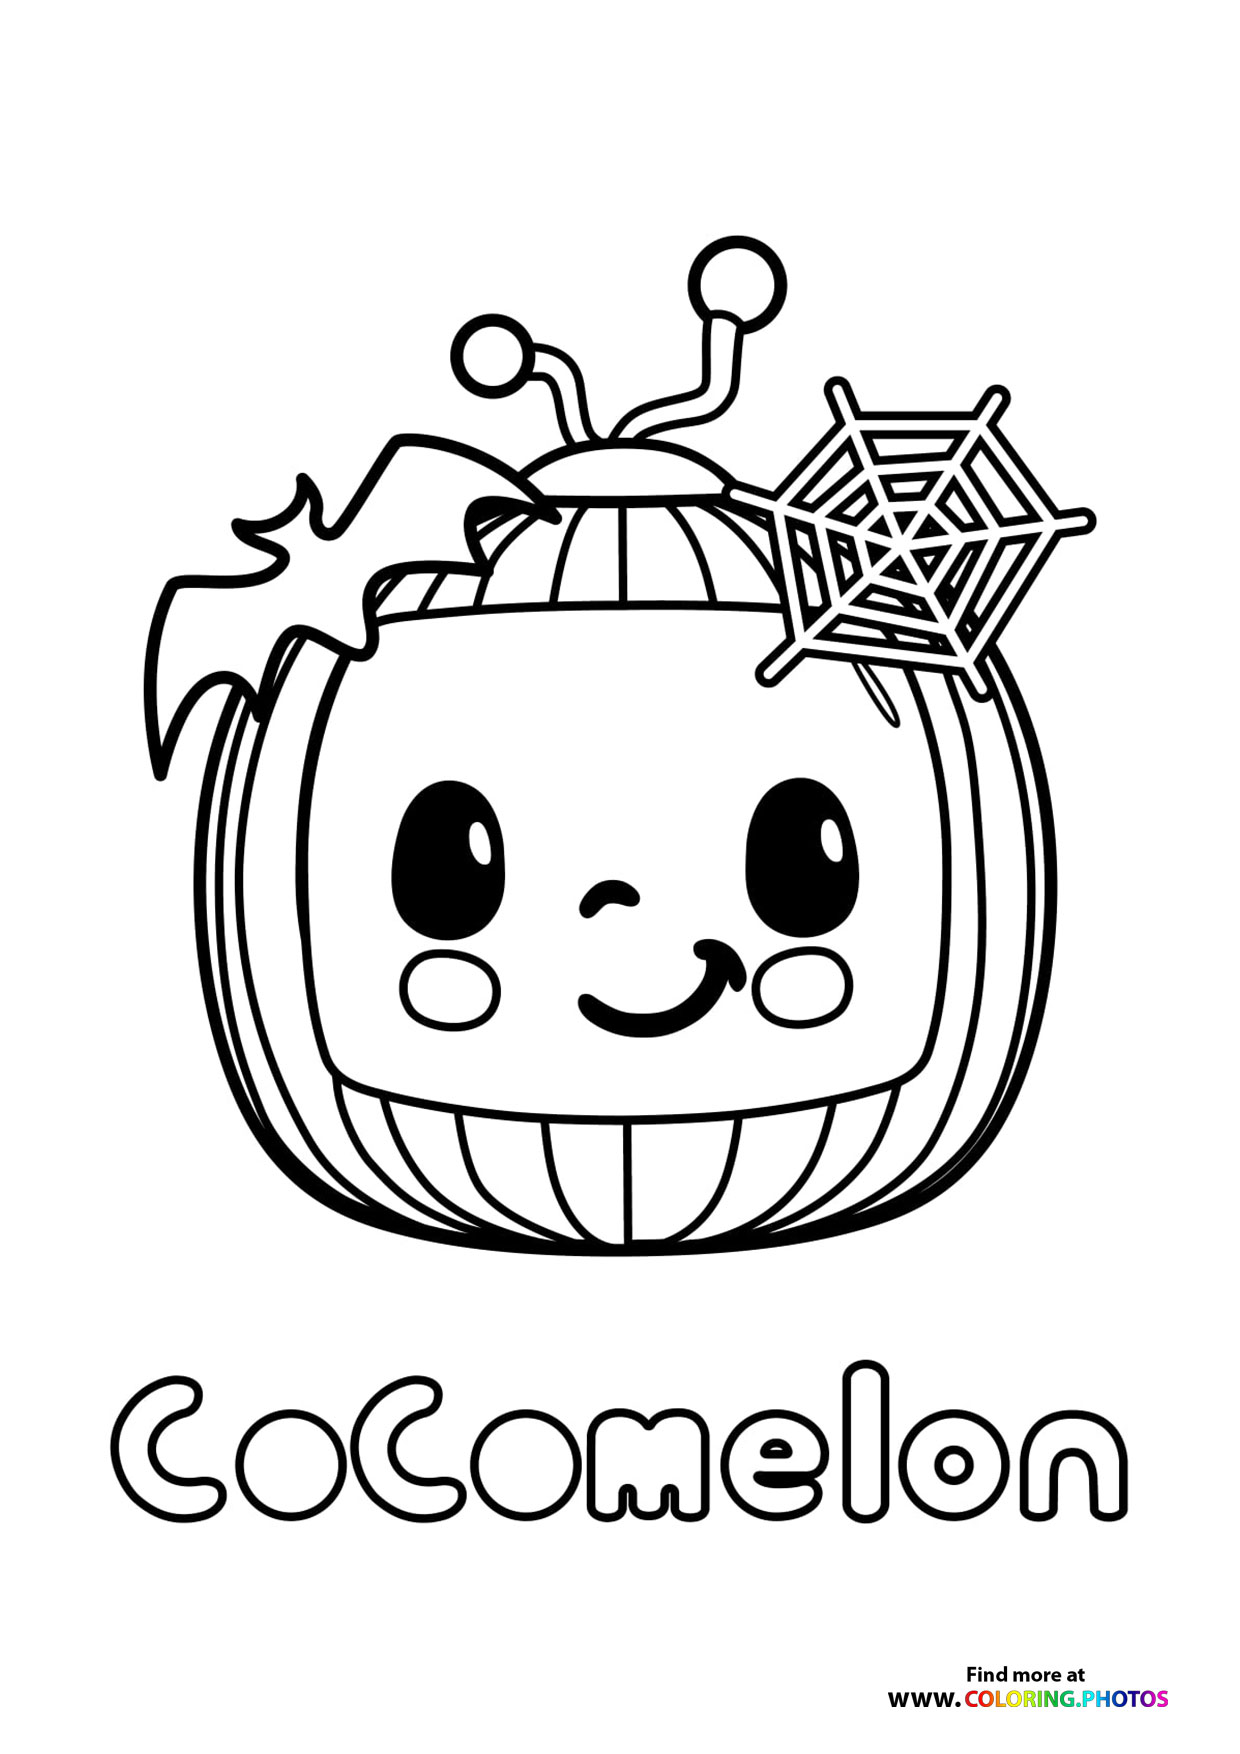 Cocomelon Halloween Coloring Book: SHAPES COLORING PAGES, 123